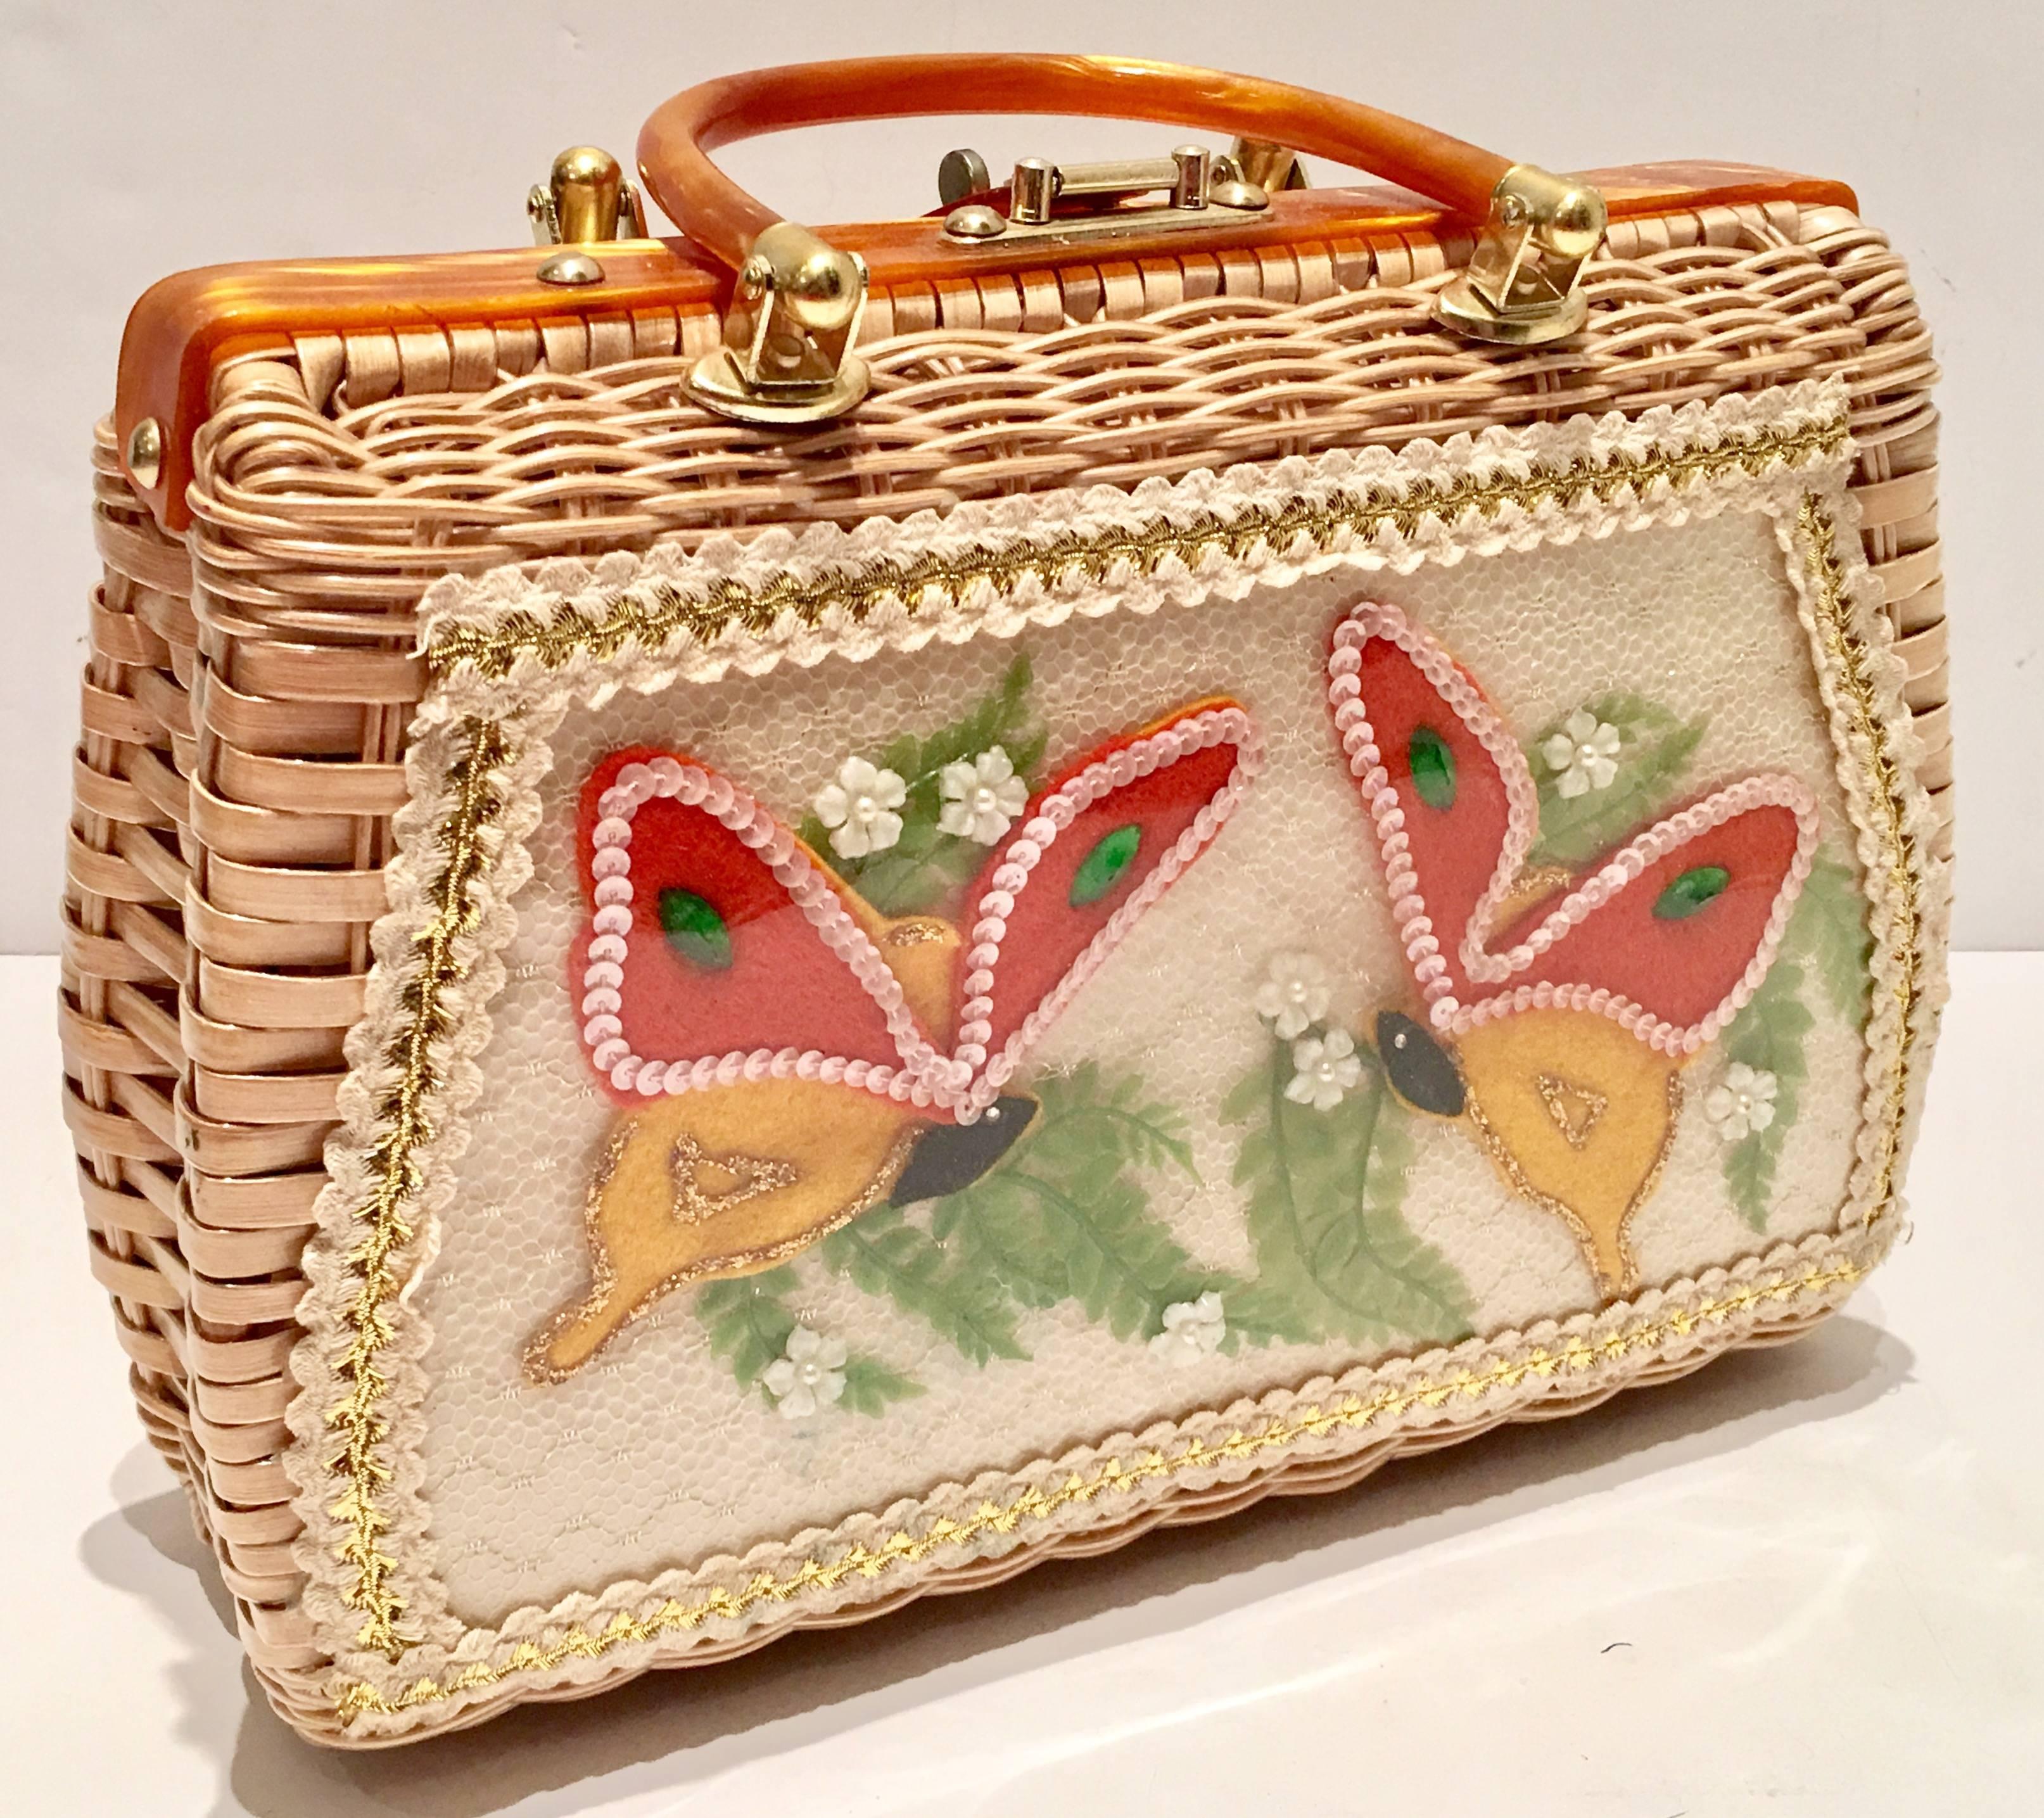 1960'S Chic & Trending woven wicker and Lucite tortoise tone handbag. This iconic 1960'S handbag features a front butterfly motif made of fabric applique under clear vinyl. Butterflies are crafted from felt, fern and flora and sealed under clear